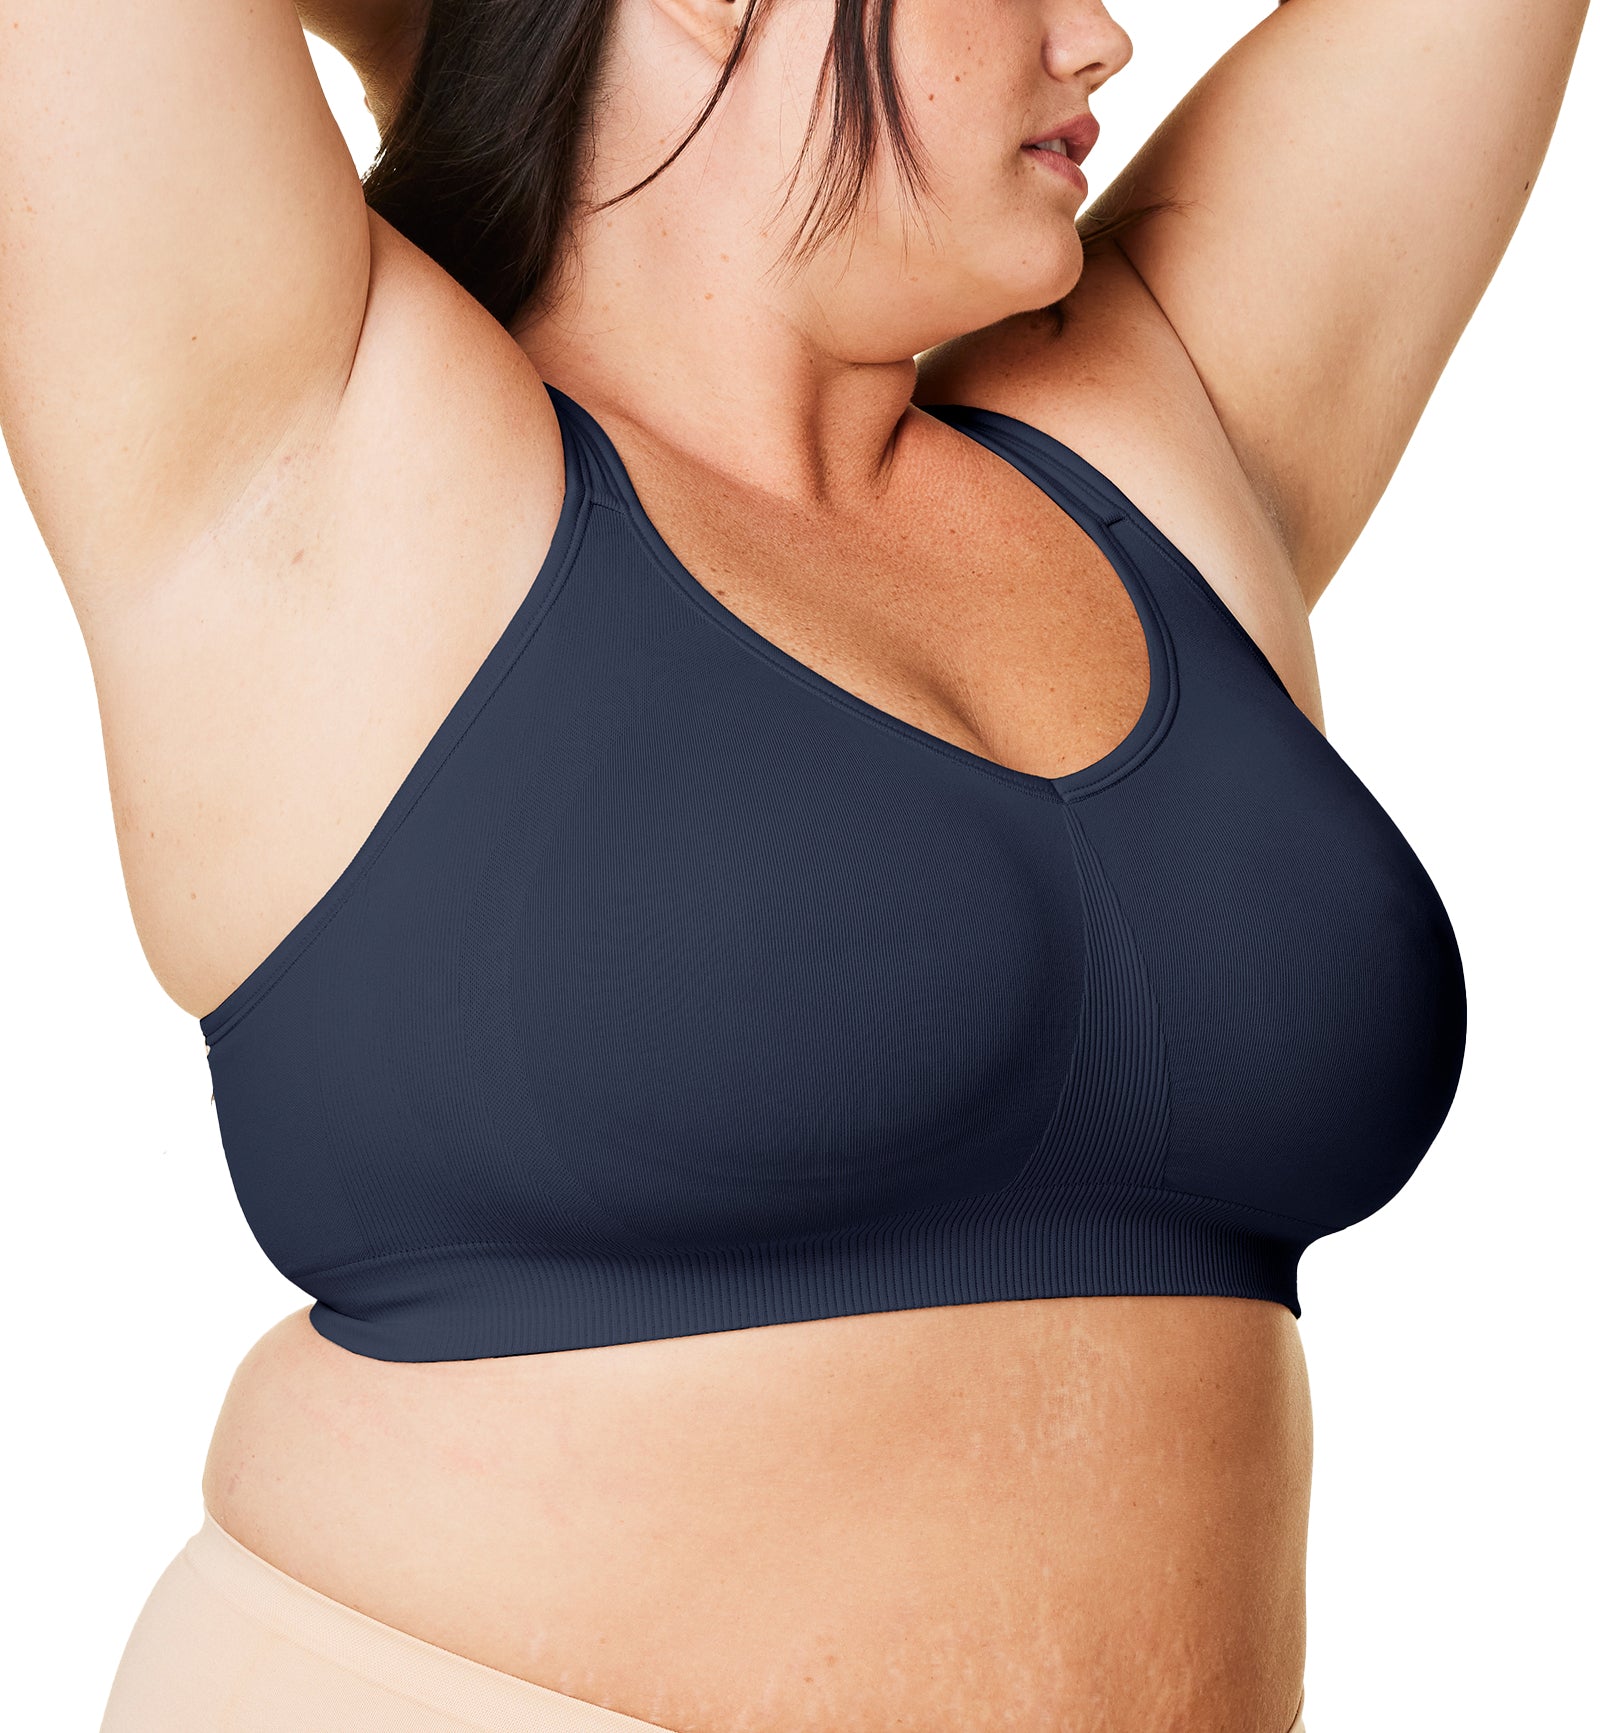 BRAVADO! DESIGNS Everyday Sculpt FULL CUP Wire-Free Bra (11011VFC),Small FC,Navy - Navy,Small-Full Cup